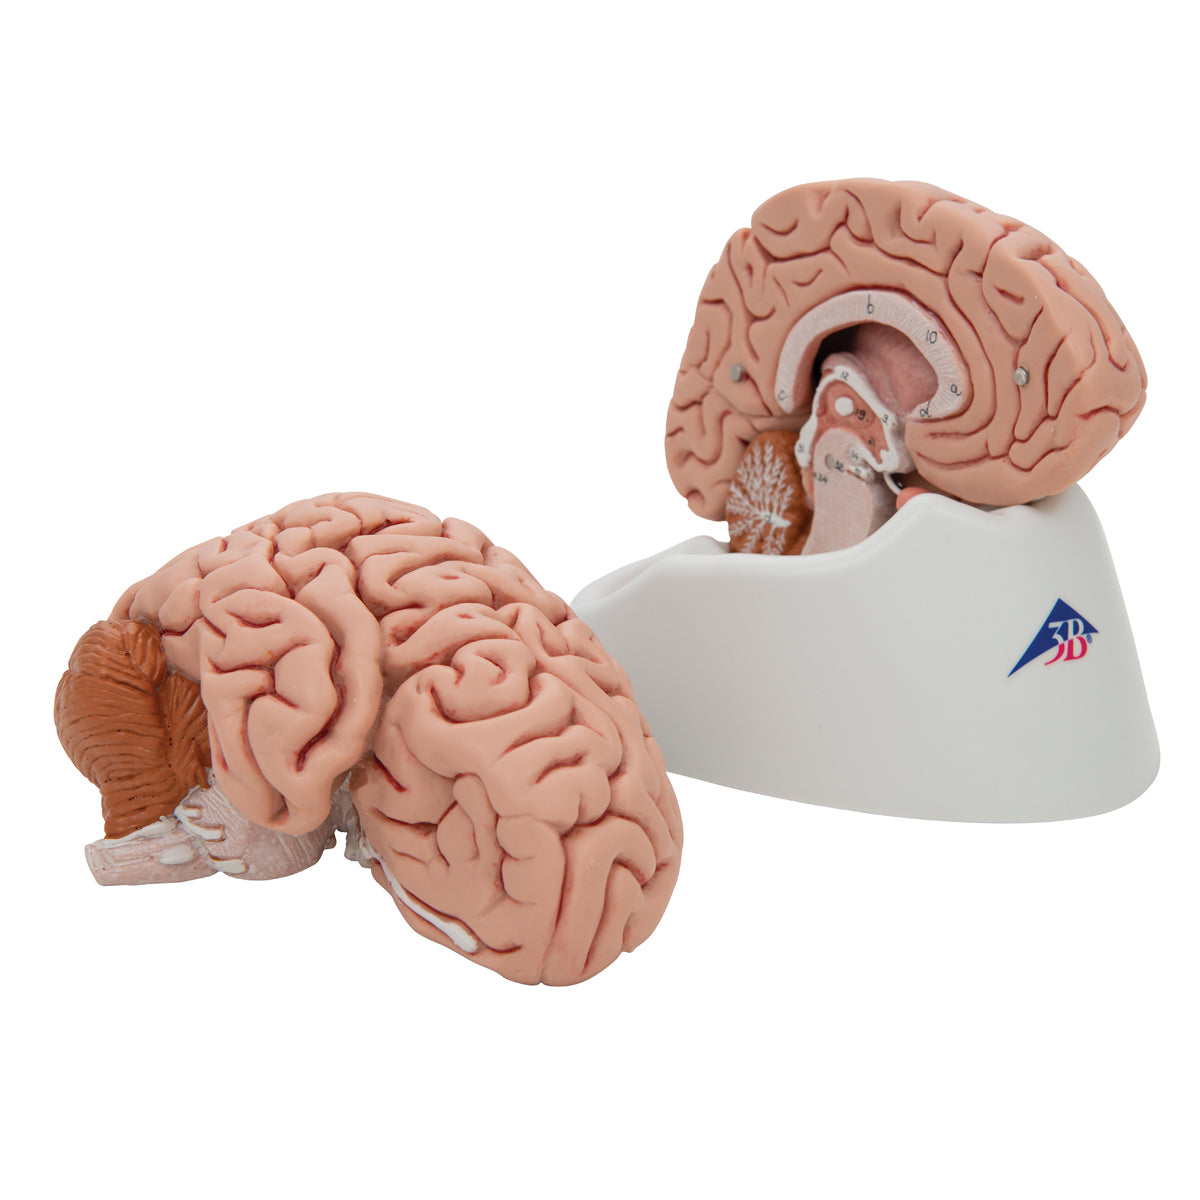 Brain model with a more lifelike appearance. Can be separated into 5 parts